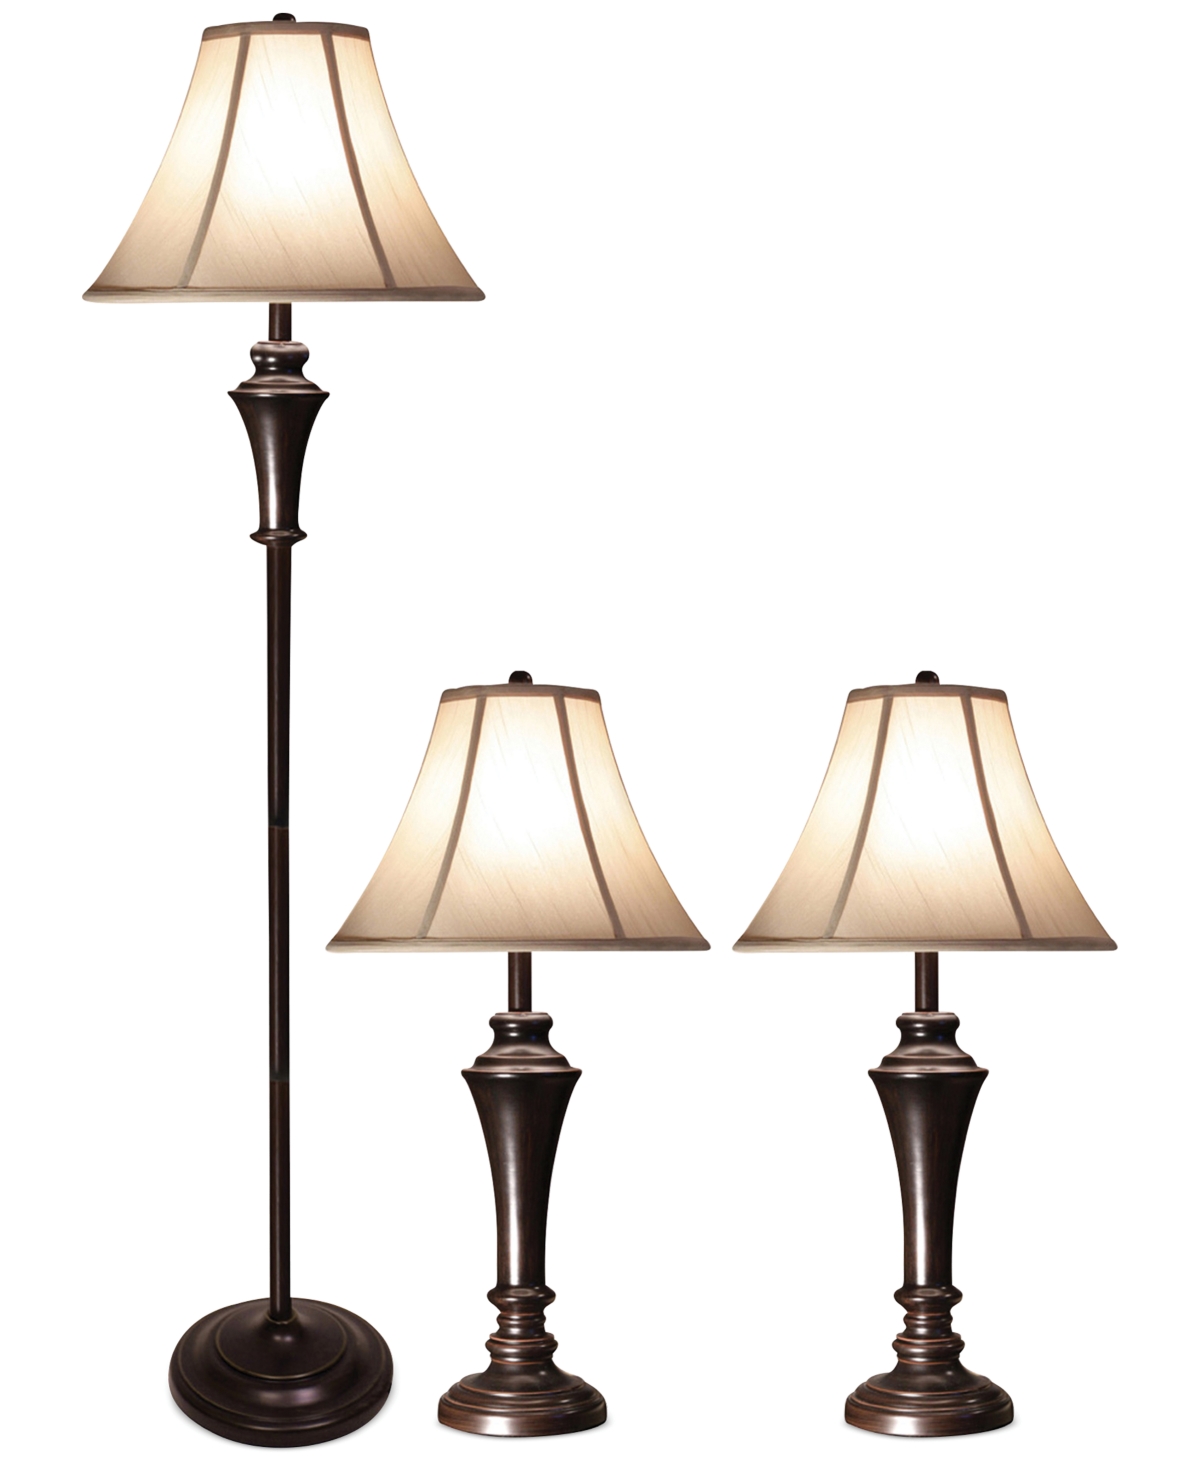 Stylecraft Aged Bronze Steel Lamps, 3 Piece In Black,taupe